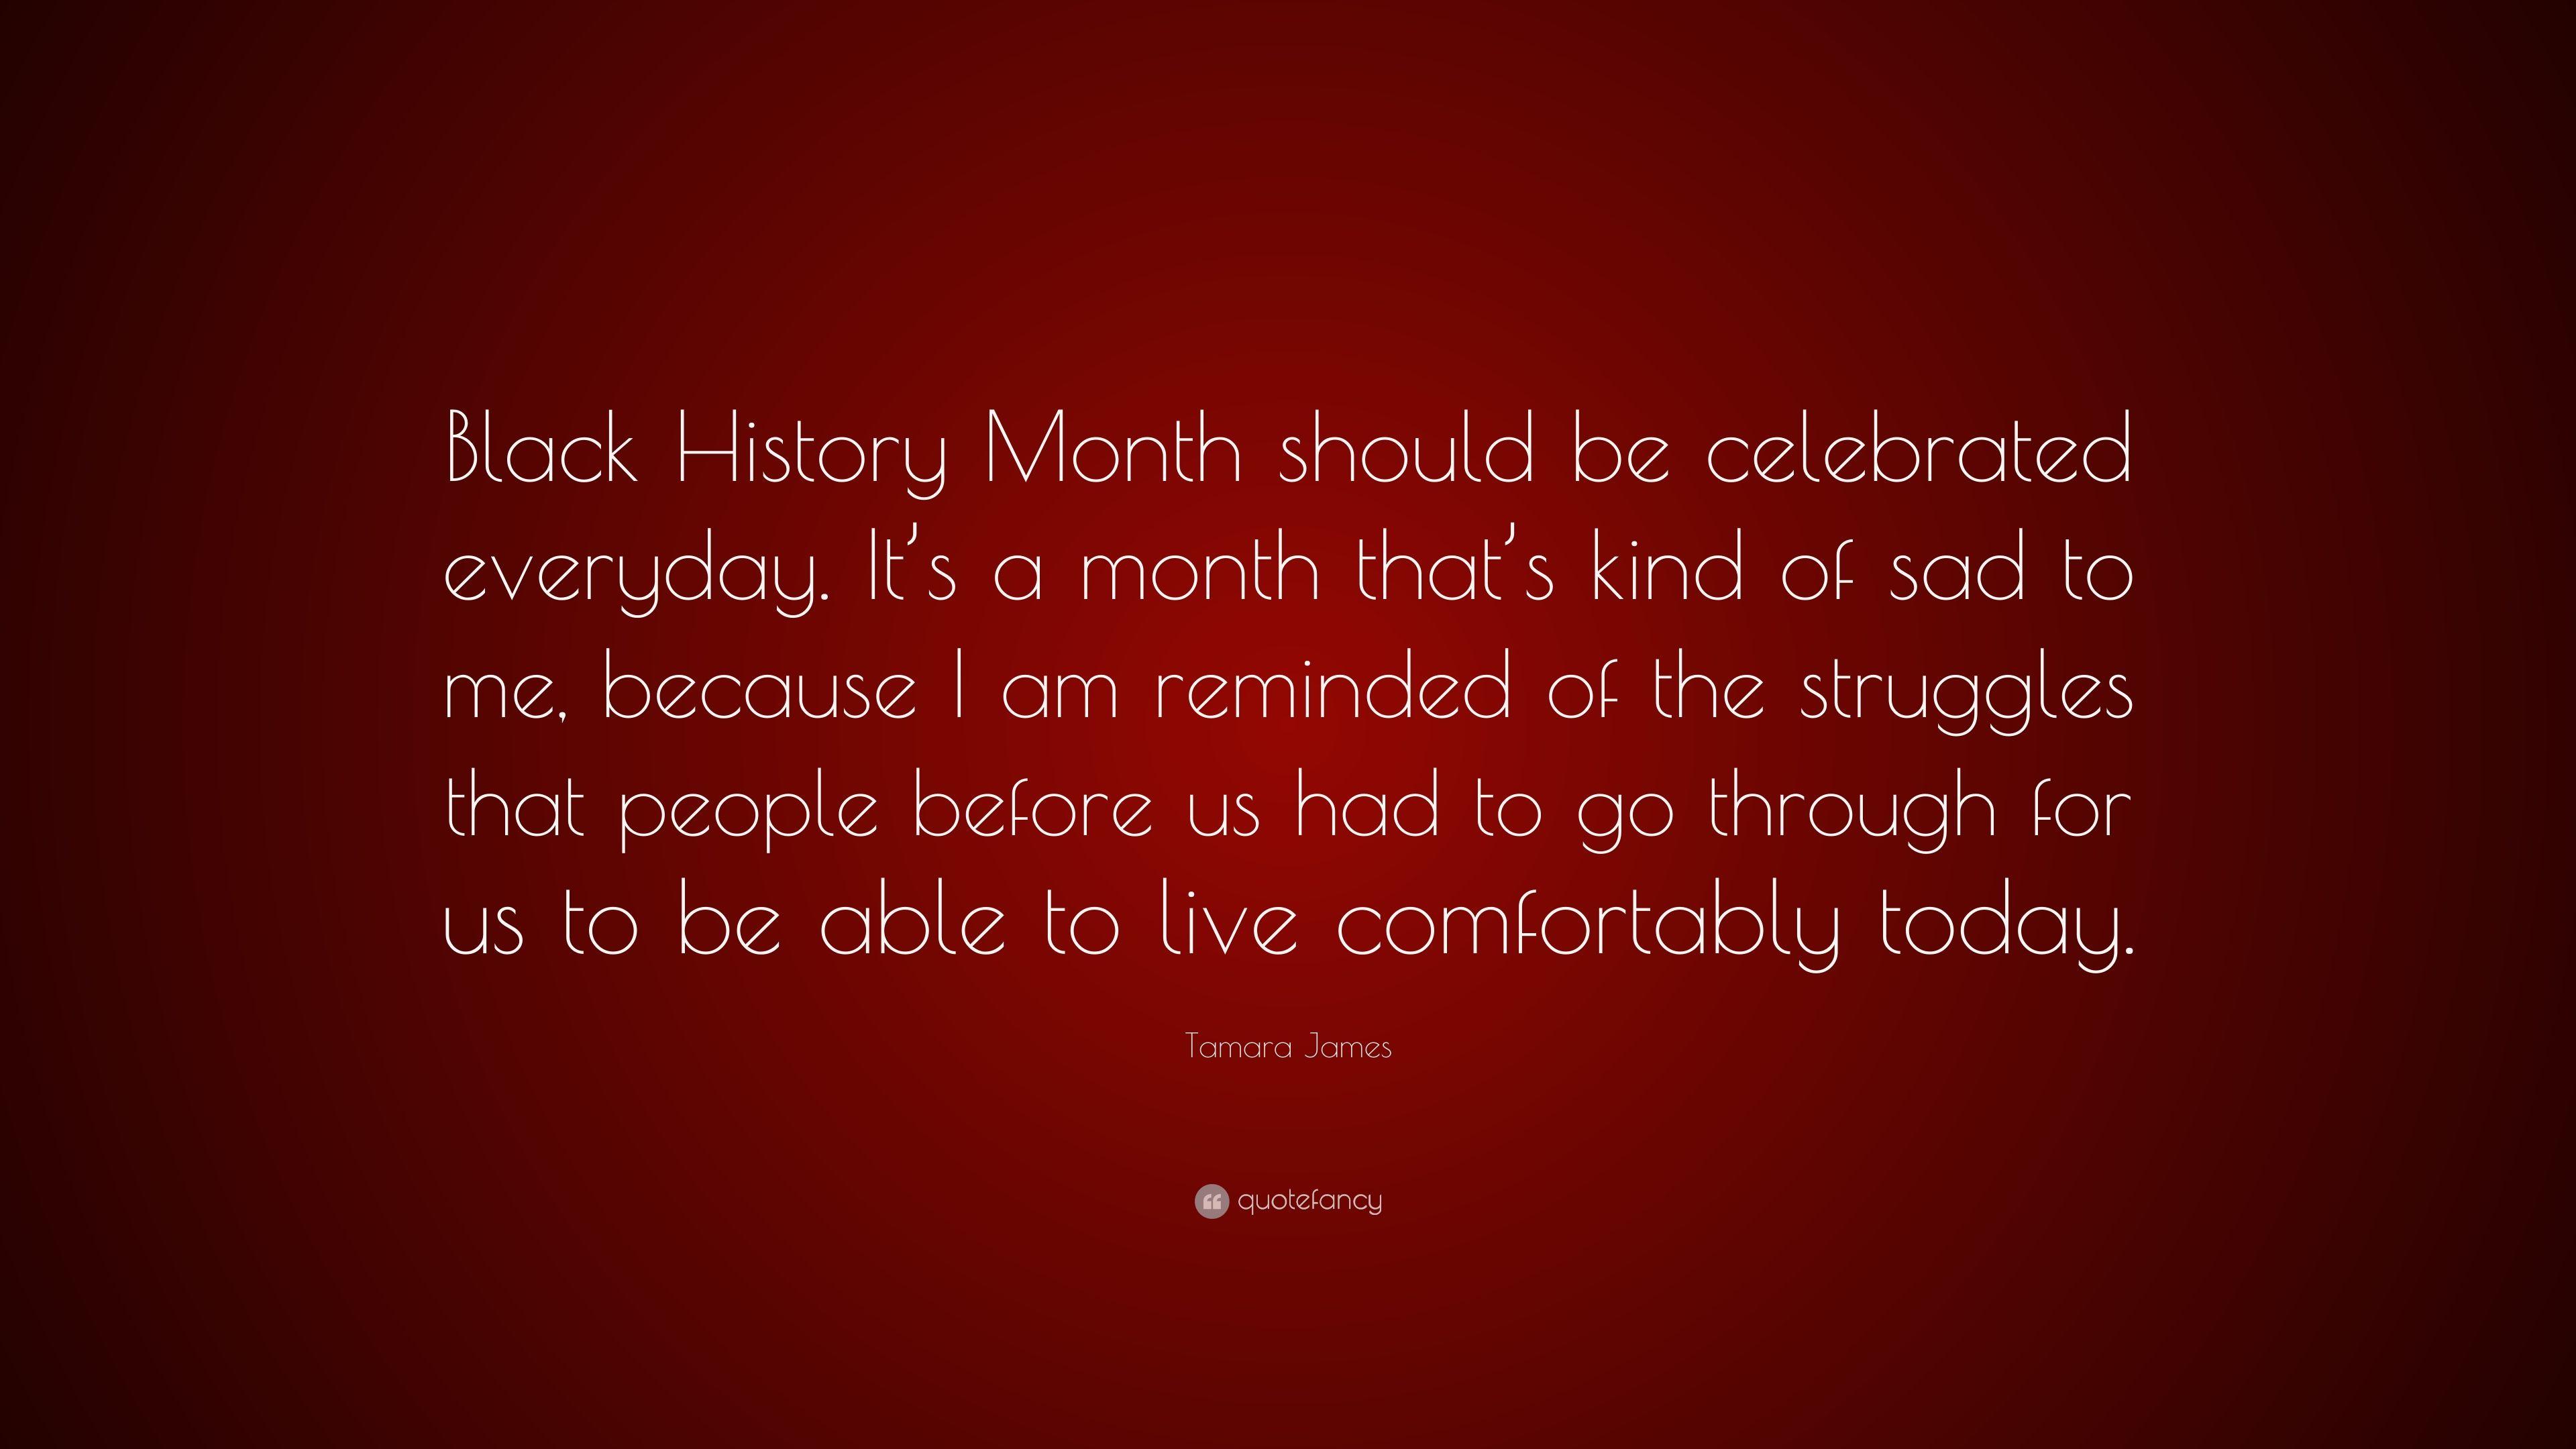 Tamara James Quote: “Black History Month should be celebrated